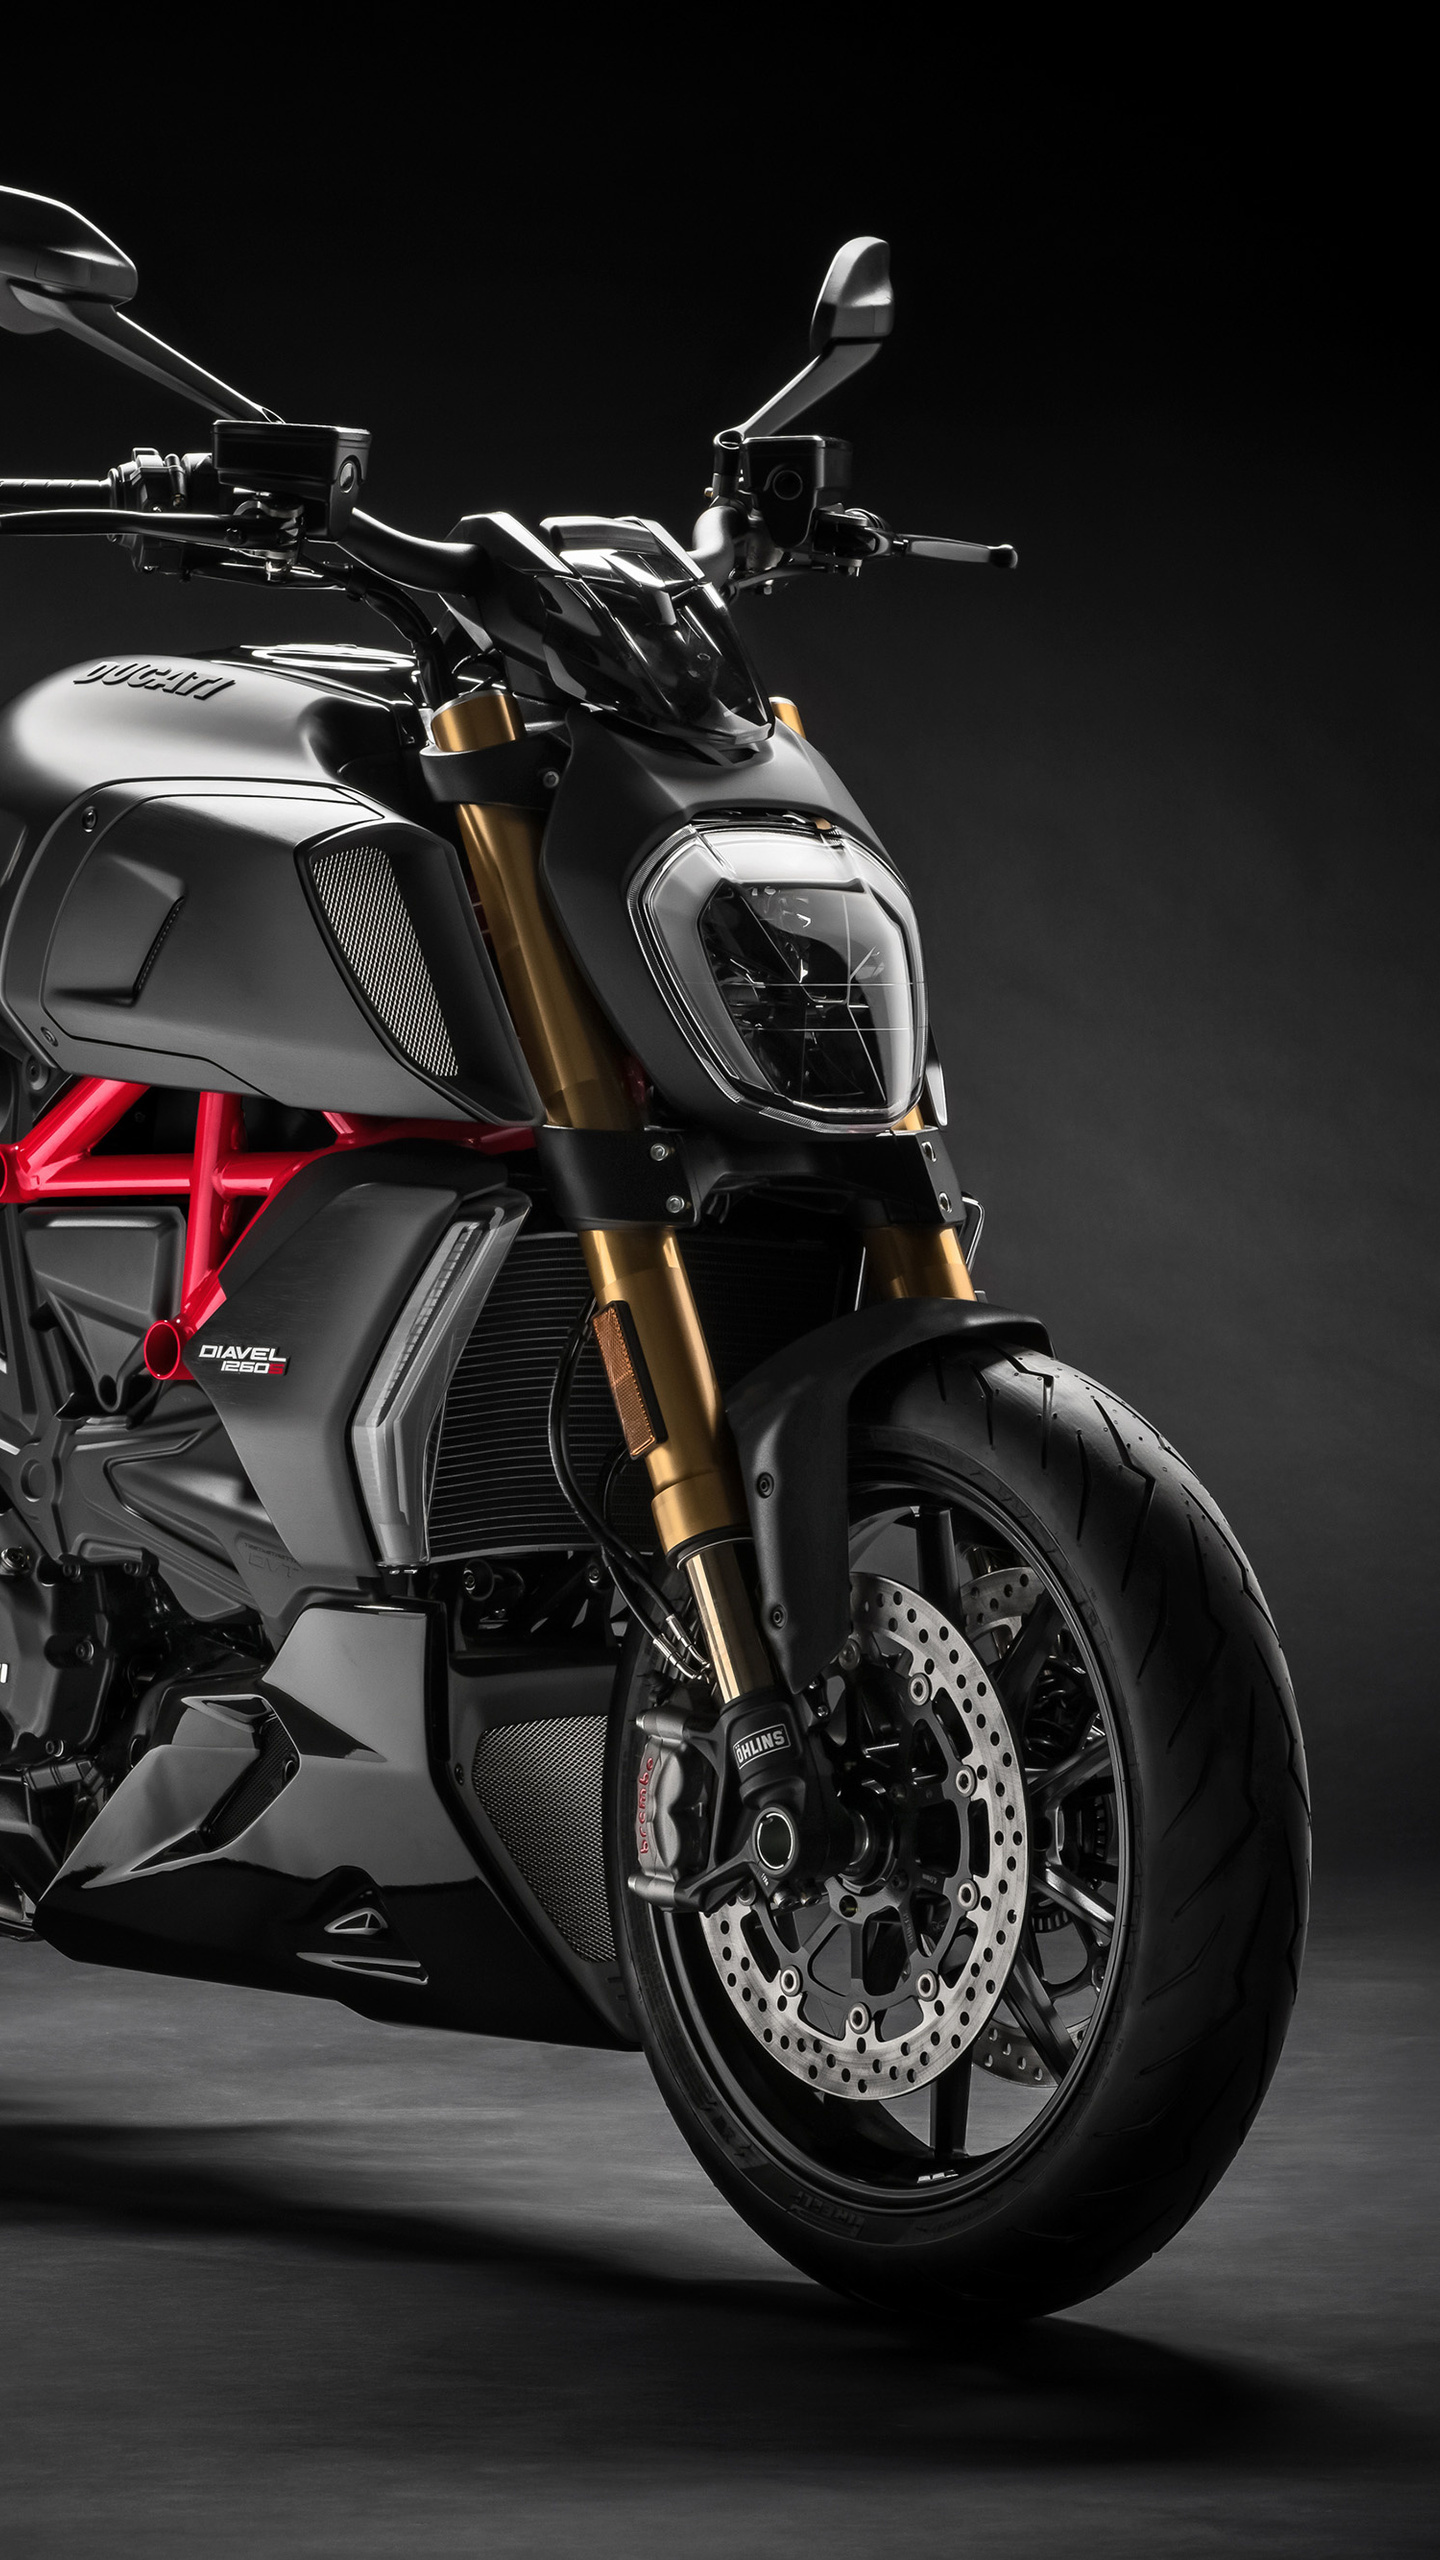 Ducati XDiavel, 2019 model, Stunning mobile wallpapers, Unforgettable riding experience, 1440x2560 HD Handy